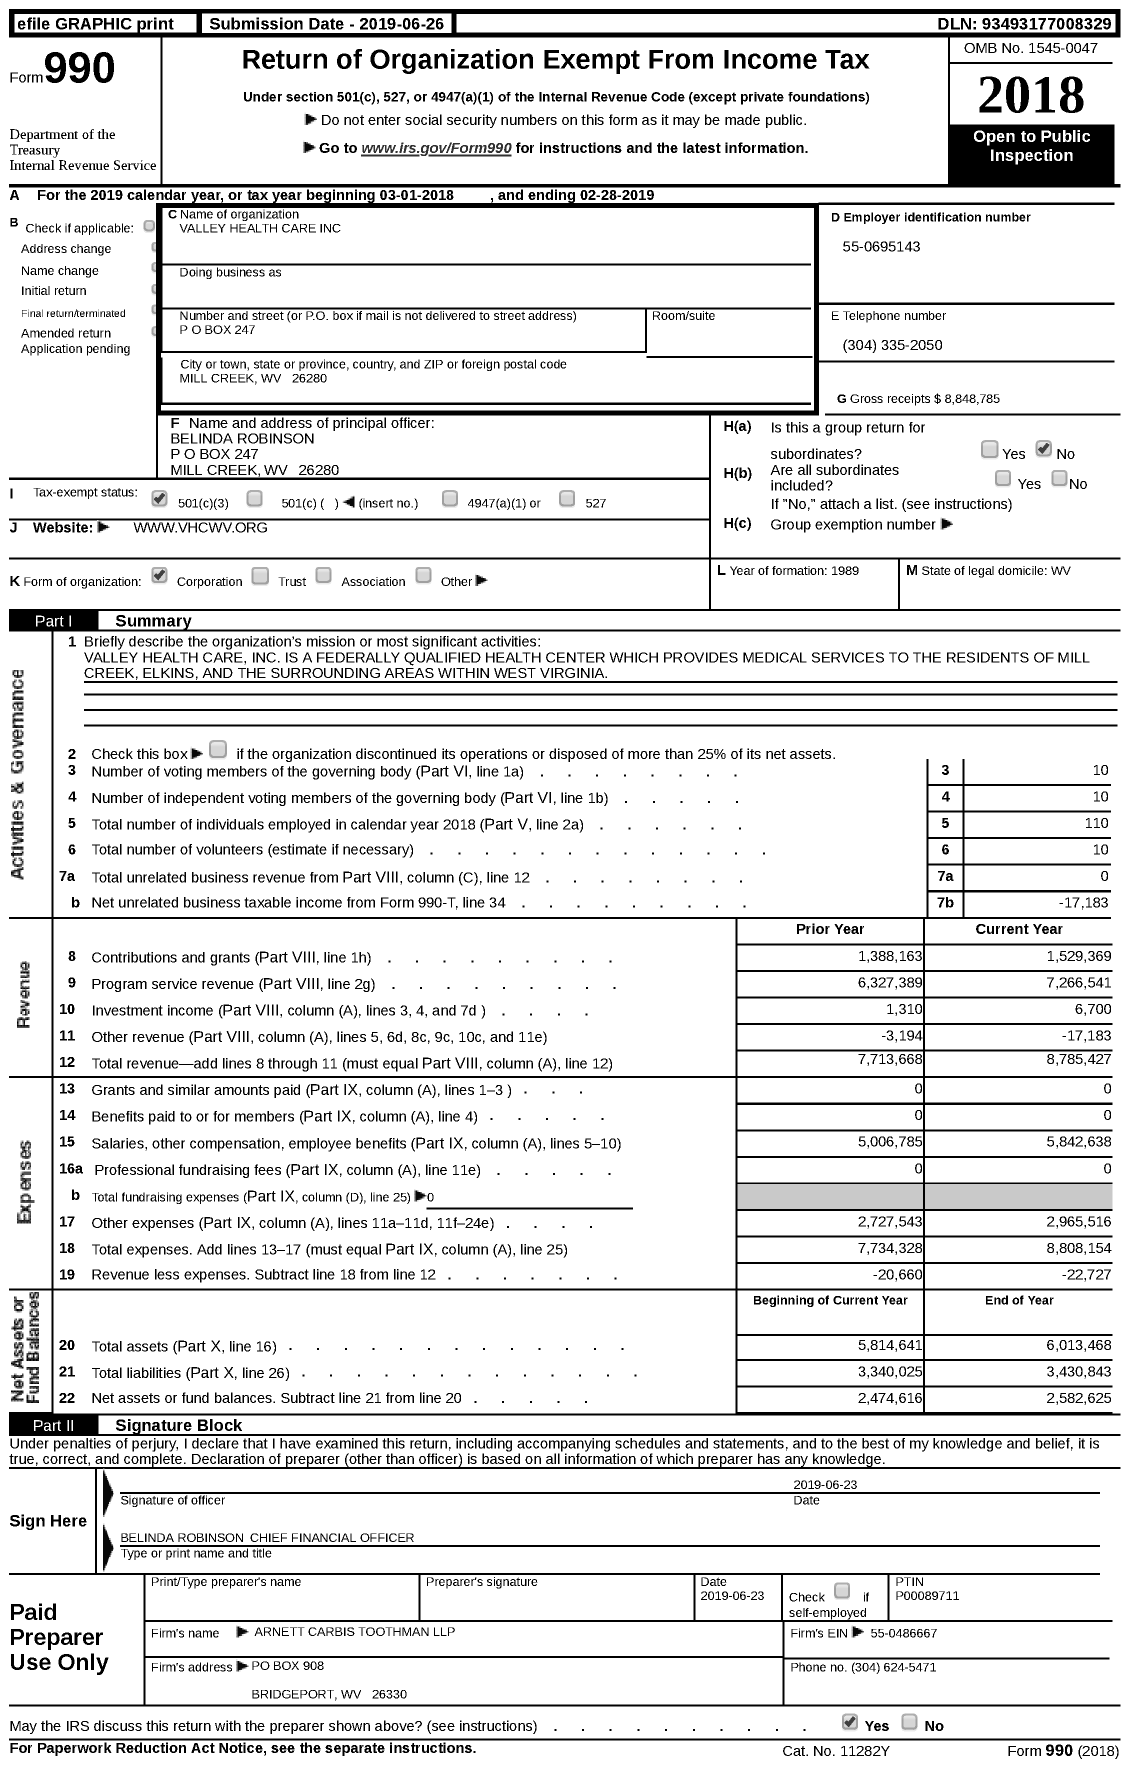 Image of first page of 2018 Form 990 for Valley Health Care (VHC)